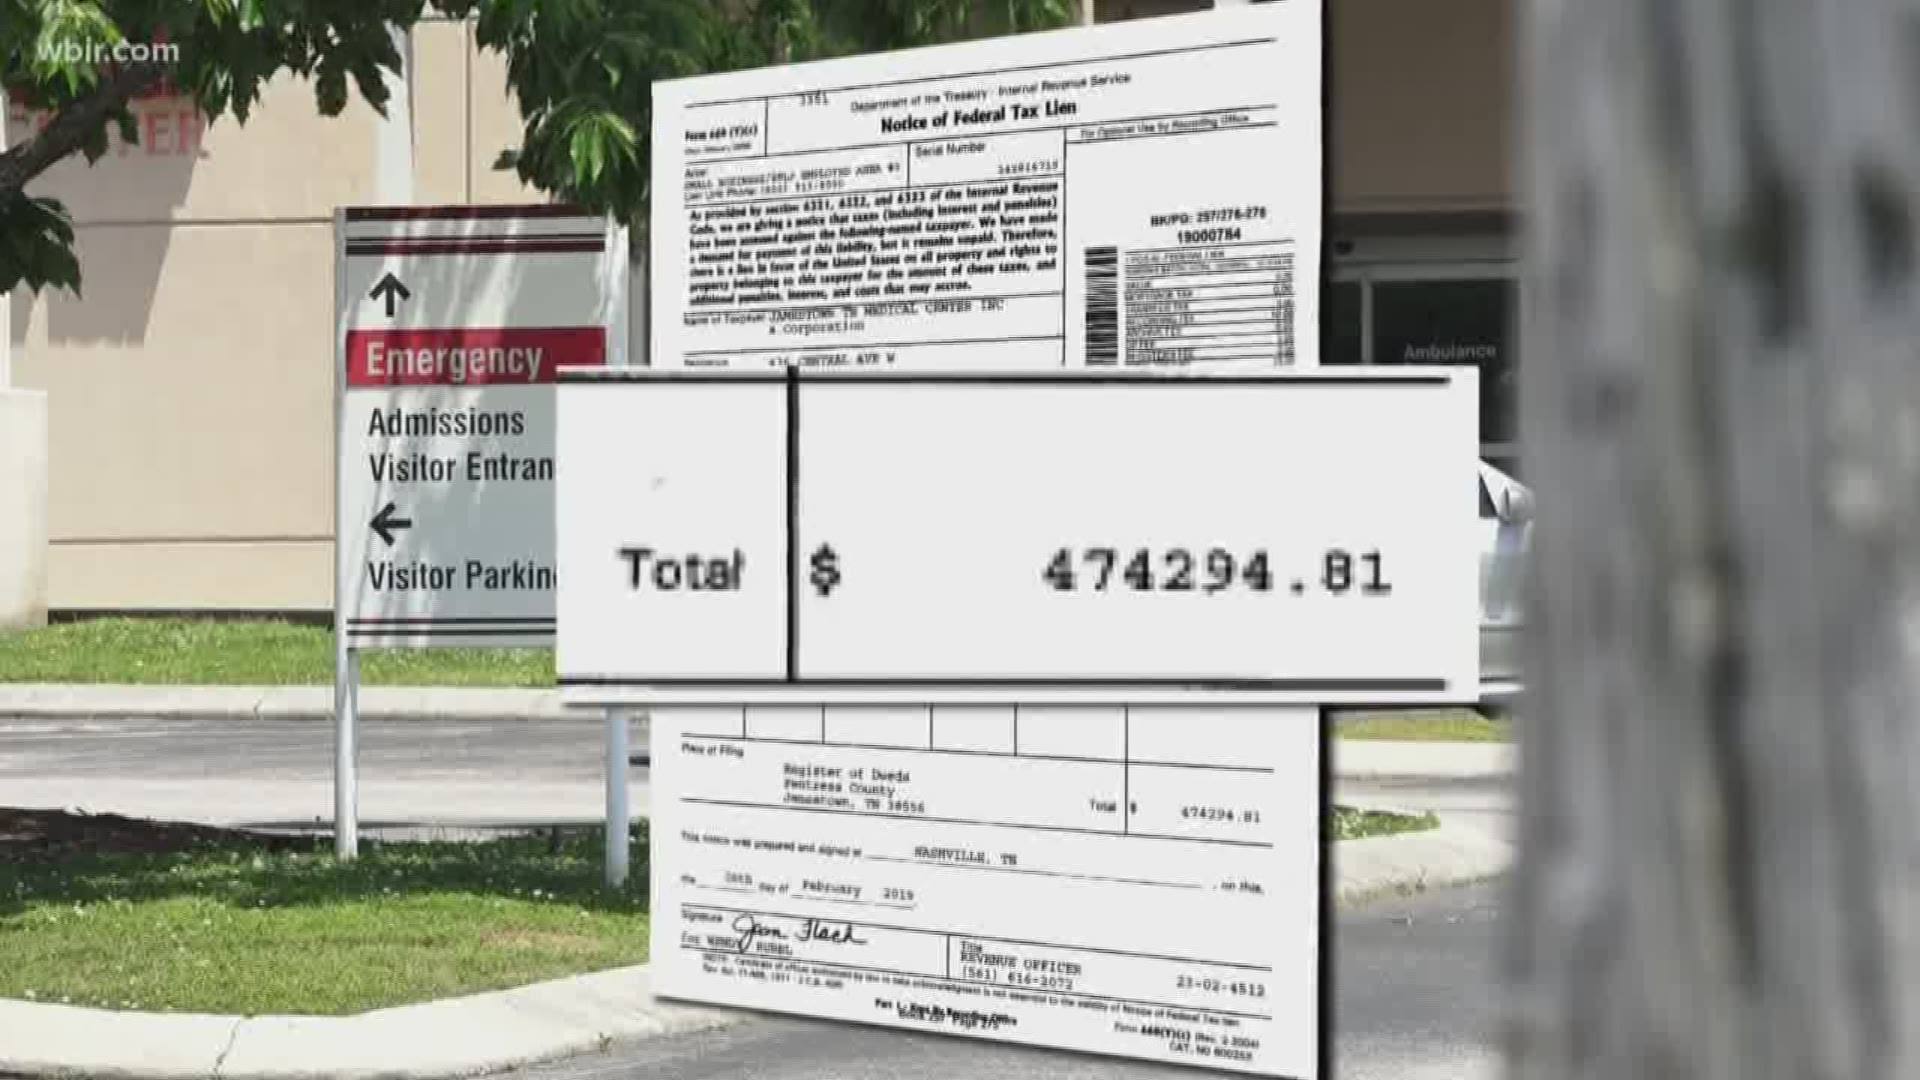 The new owner of several rural East Tennessee Hospitals owes hundreds of thousands of dollars in unpaid taxes and is the subject of lawsuits claiming they failed to pay employees and contractors.